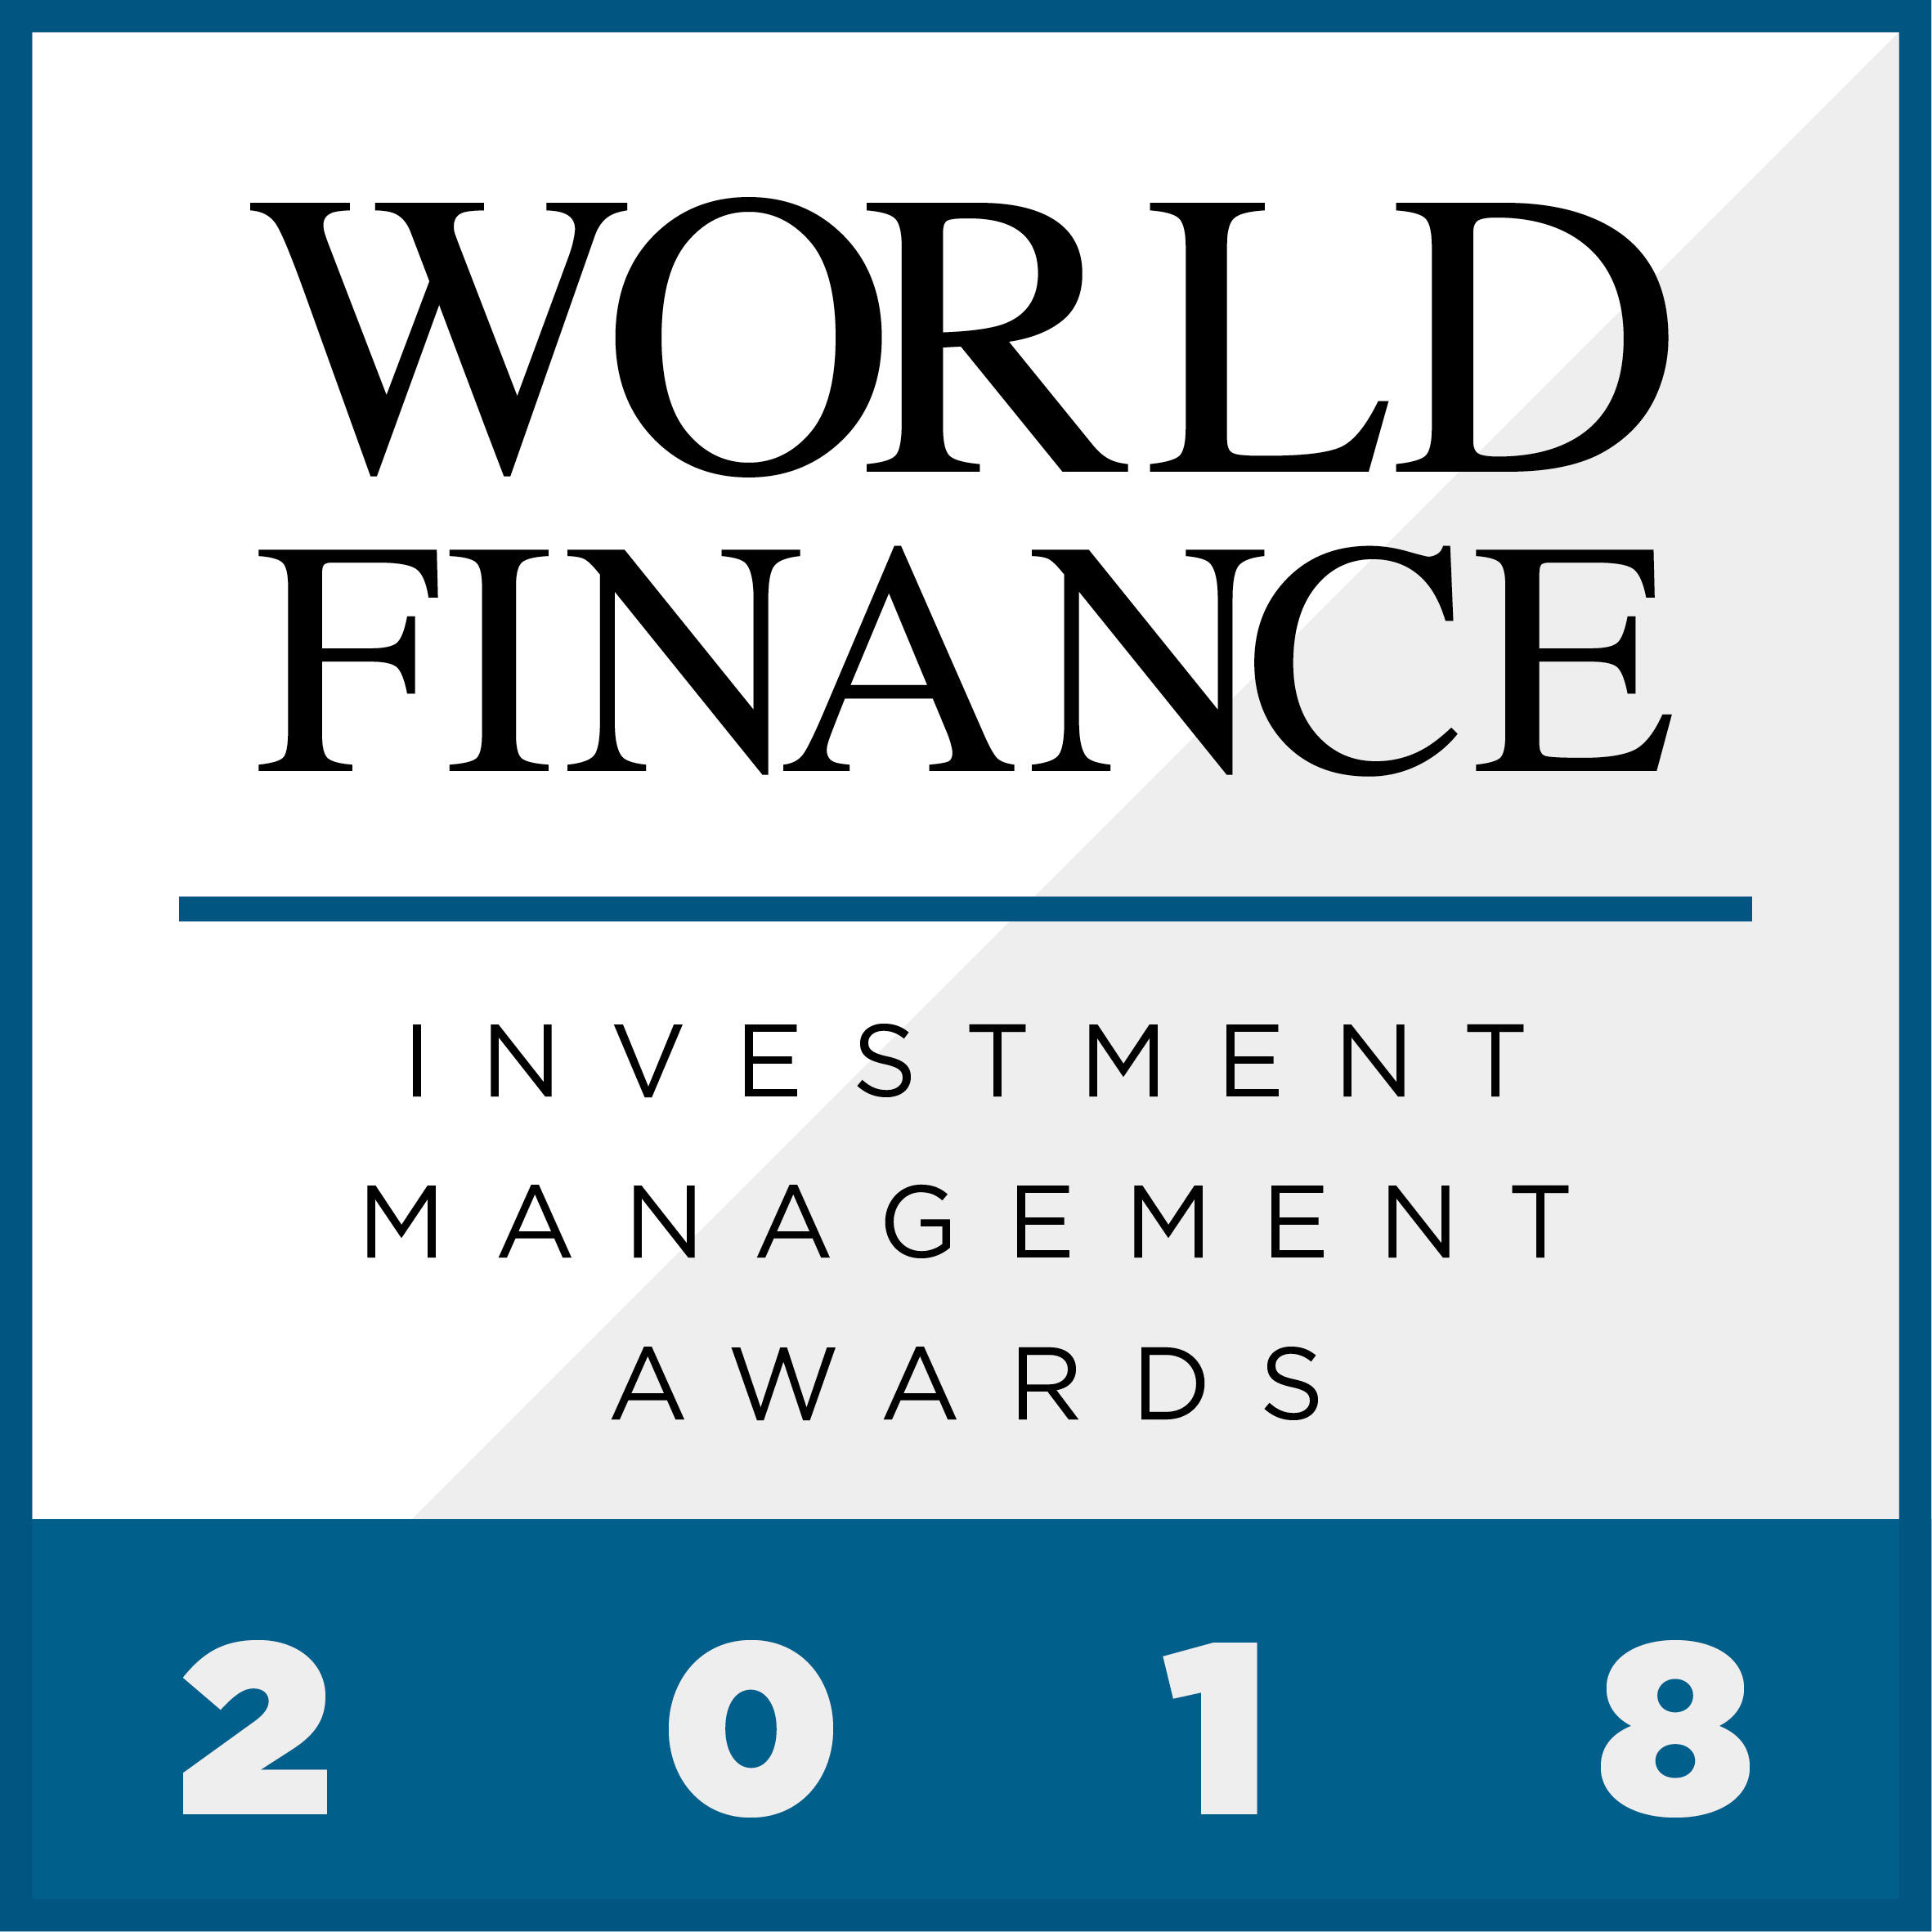 In the 2018 Investment Management Awards, we commend the firms that continue to thrive despite regulatory changes and trade uncertainties